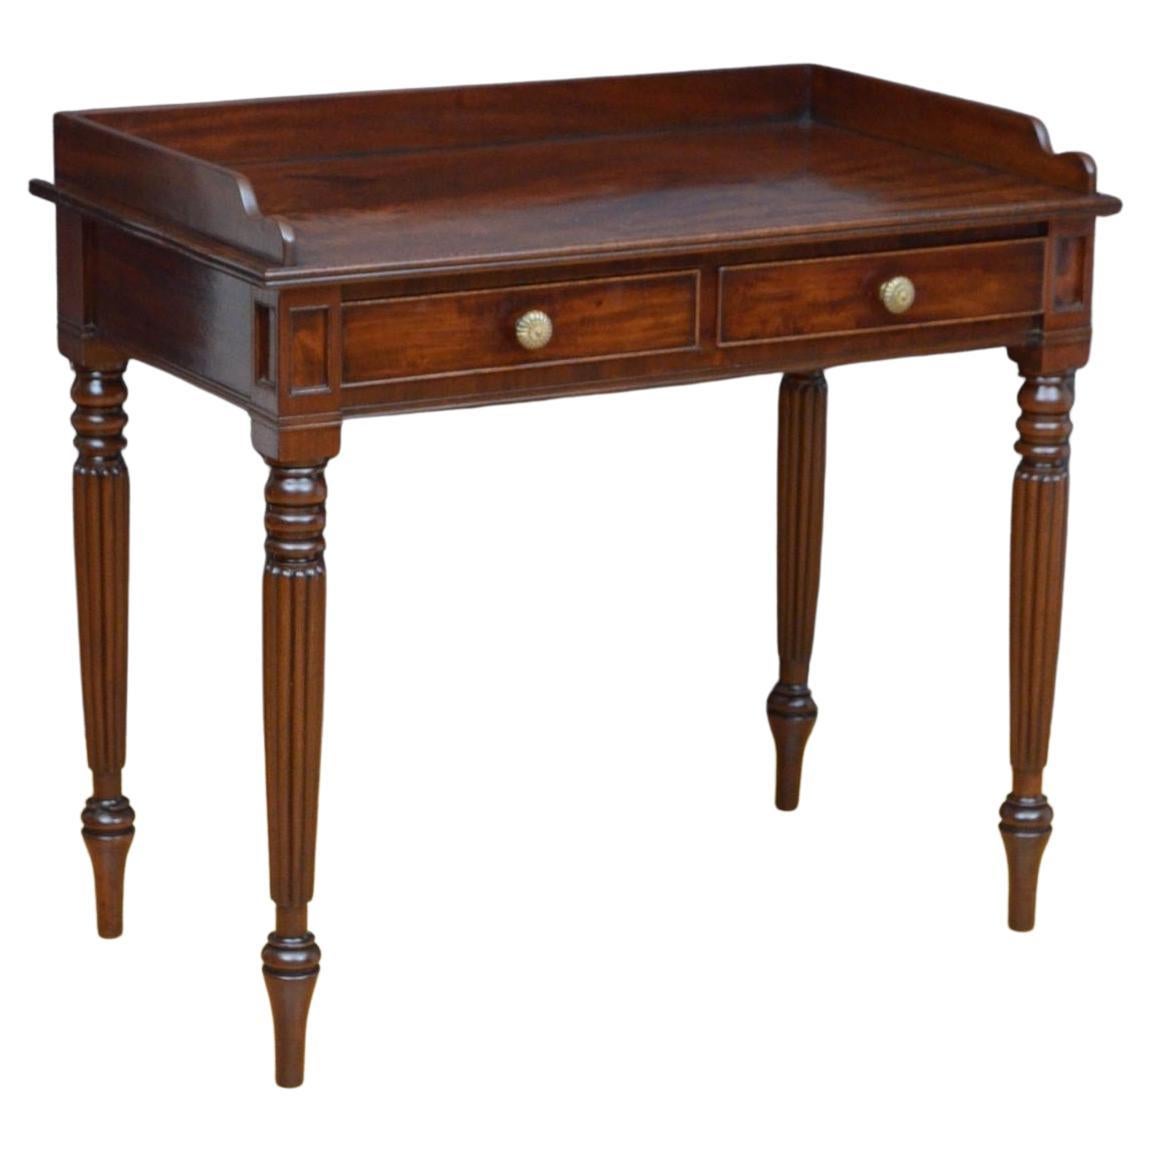 Regency Mahogany Table in the Manner of Gillows